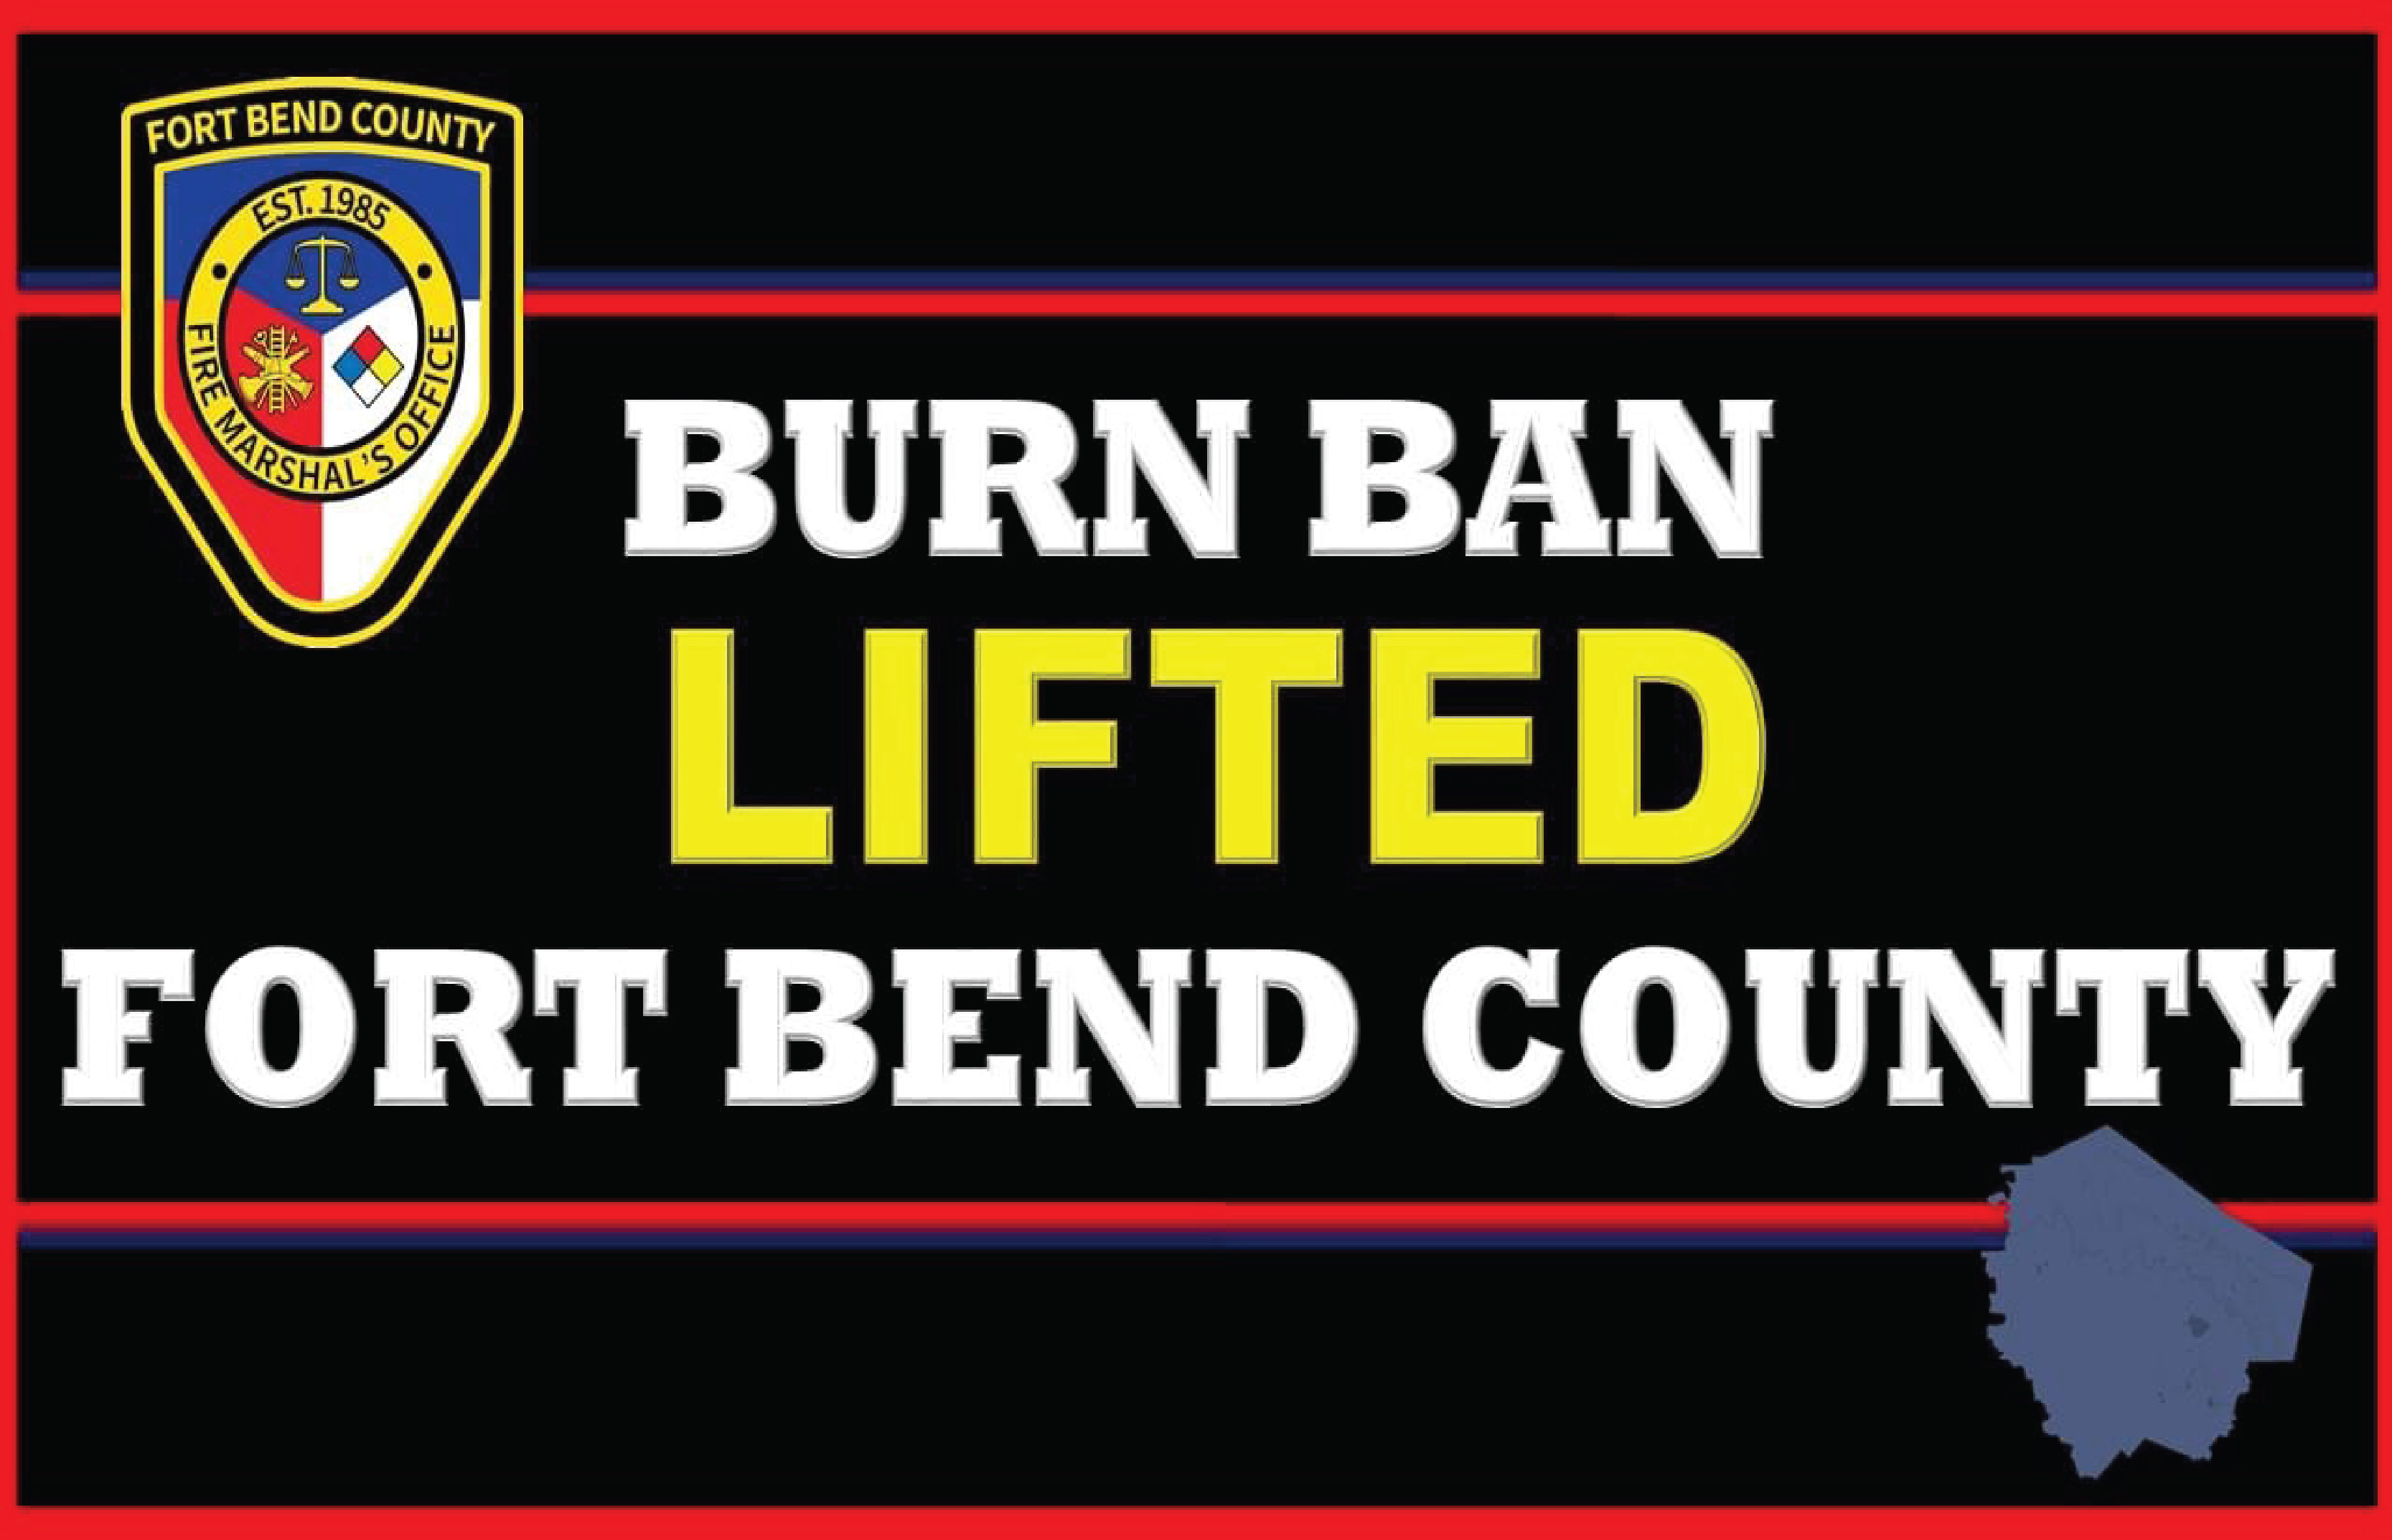 Fort Bend County Burn Ban Lifted